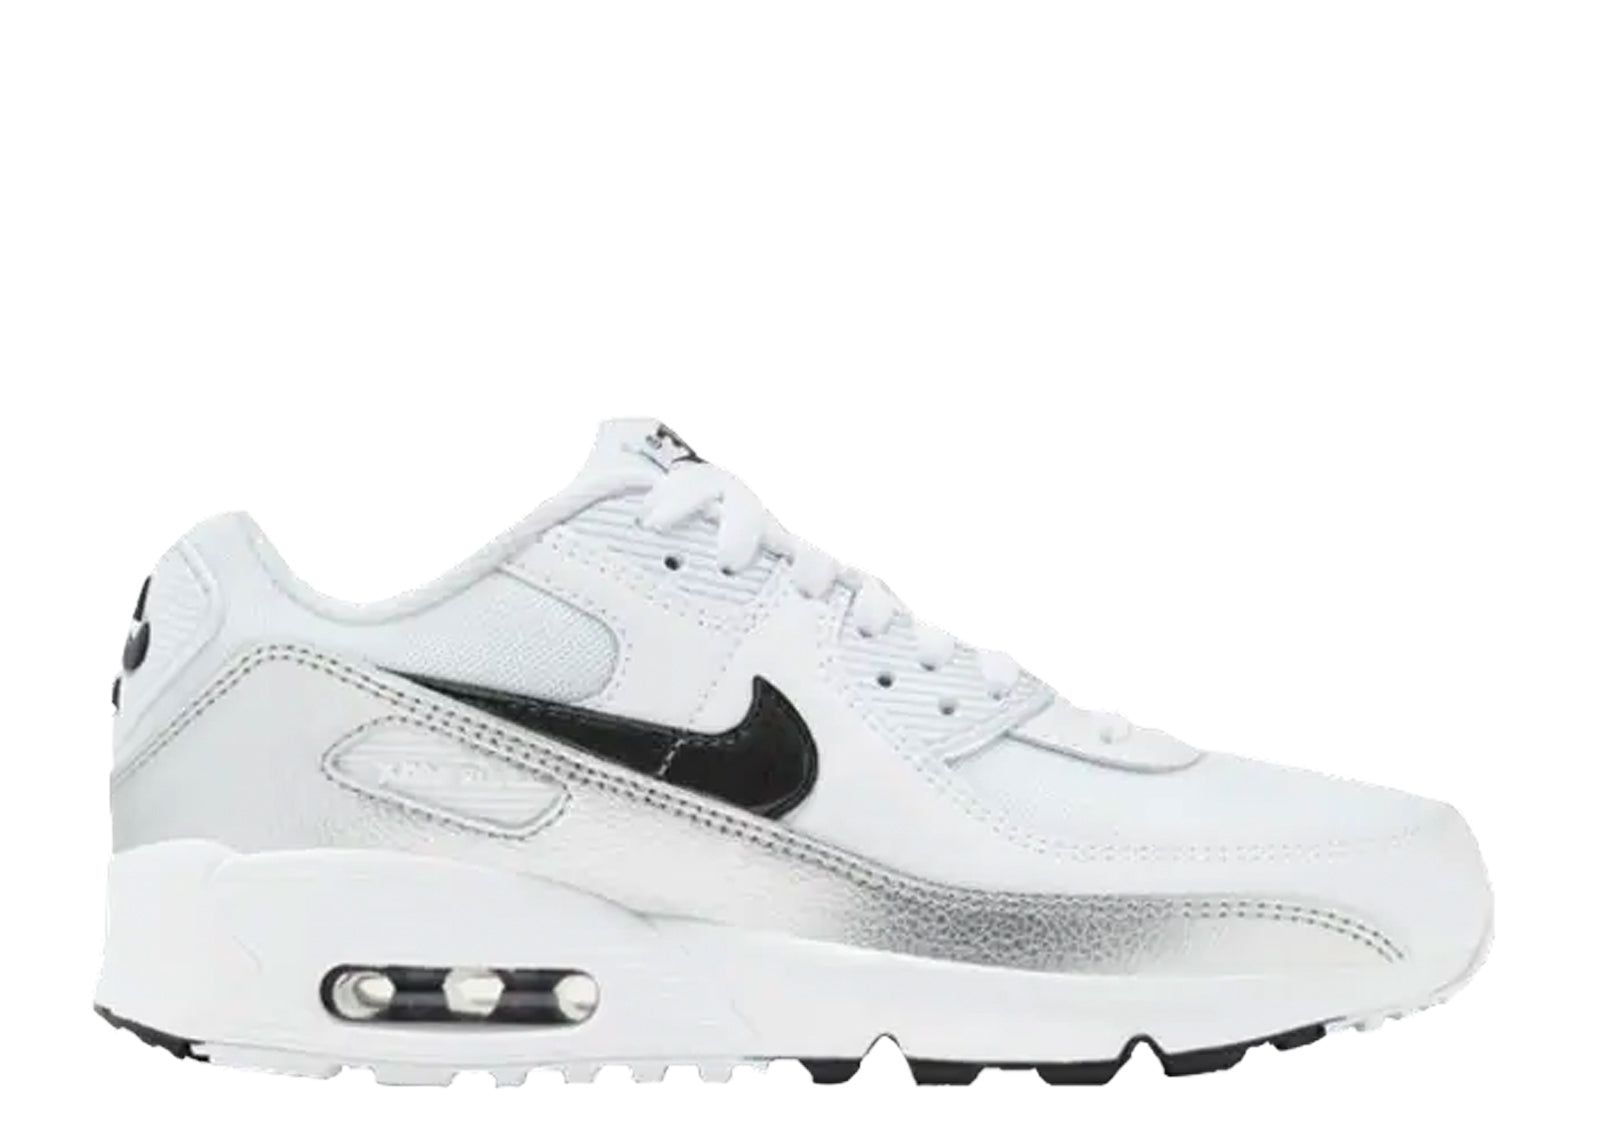 Second Chance - which will feature three pairs of Air Max 1s using exotic prints 90 White & Black (GS) - 39 | NEW